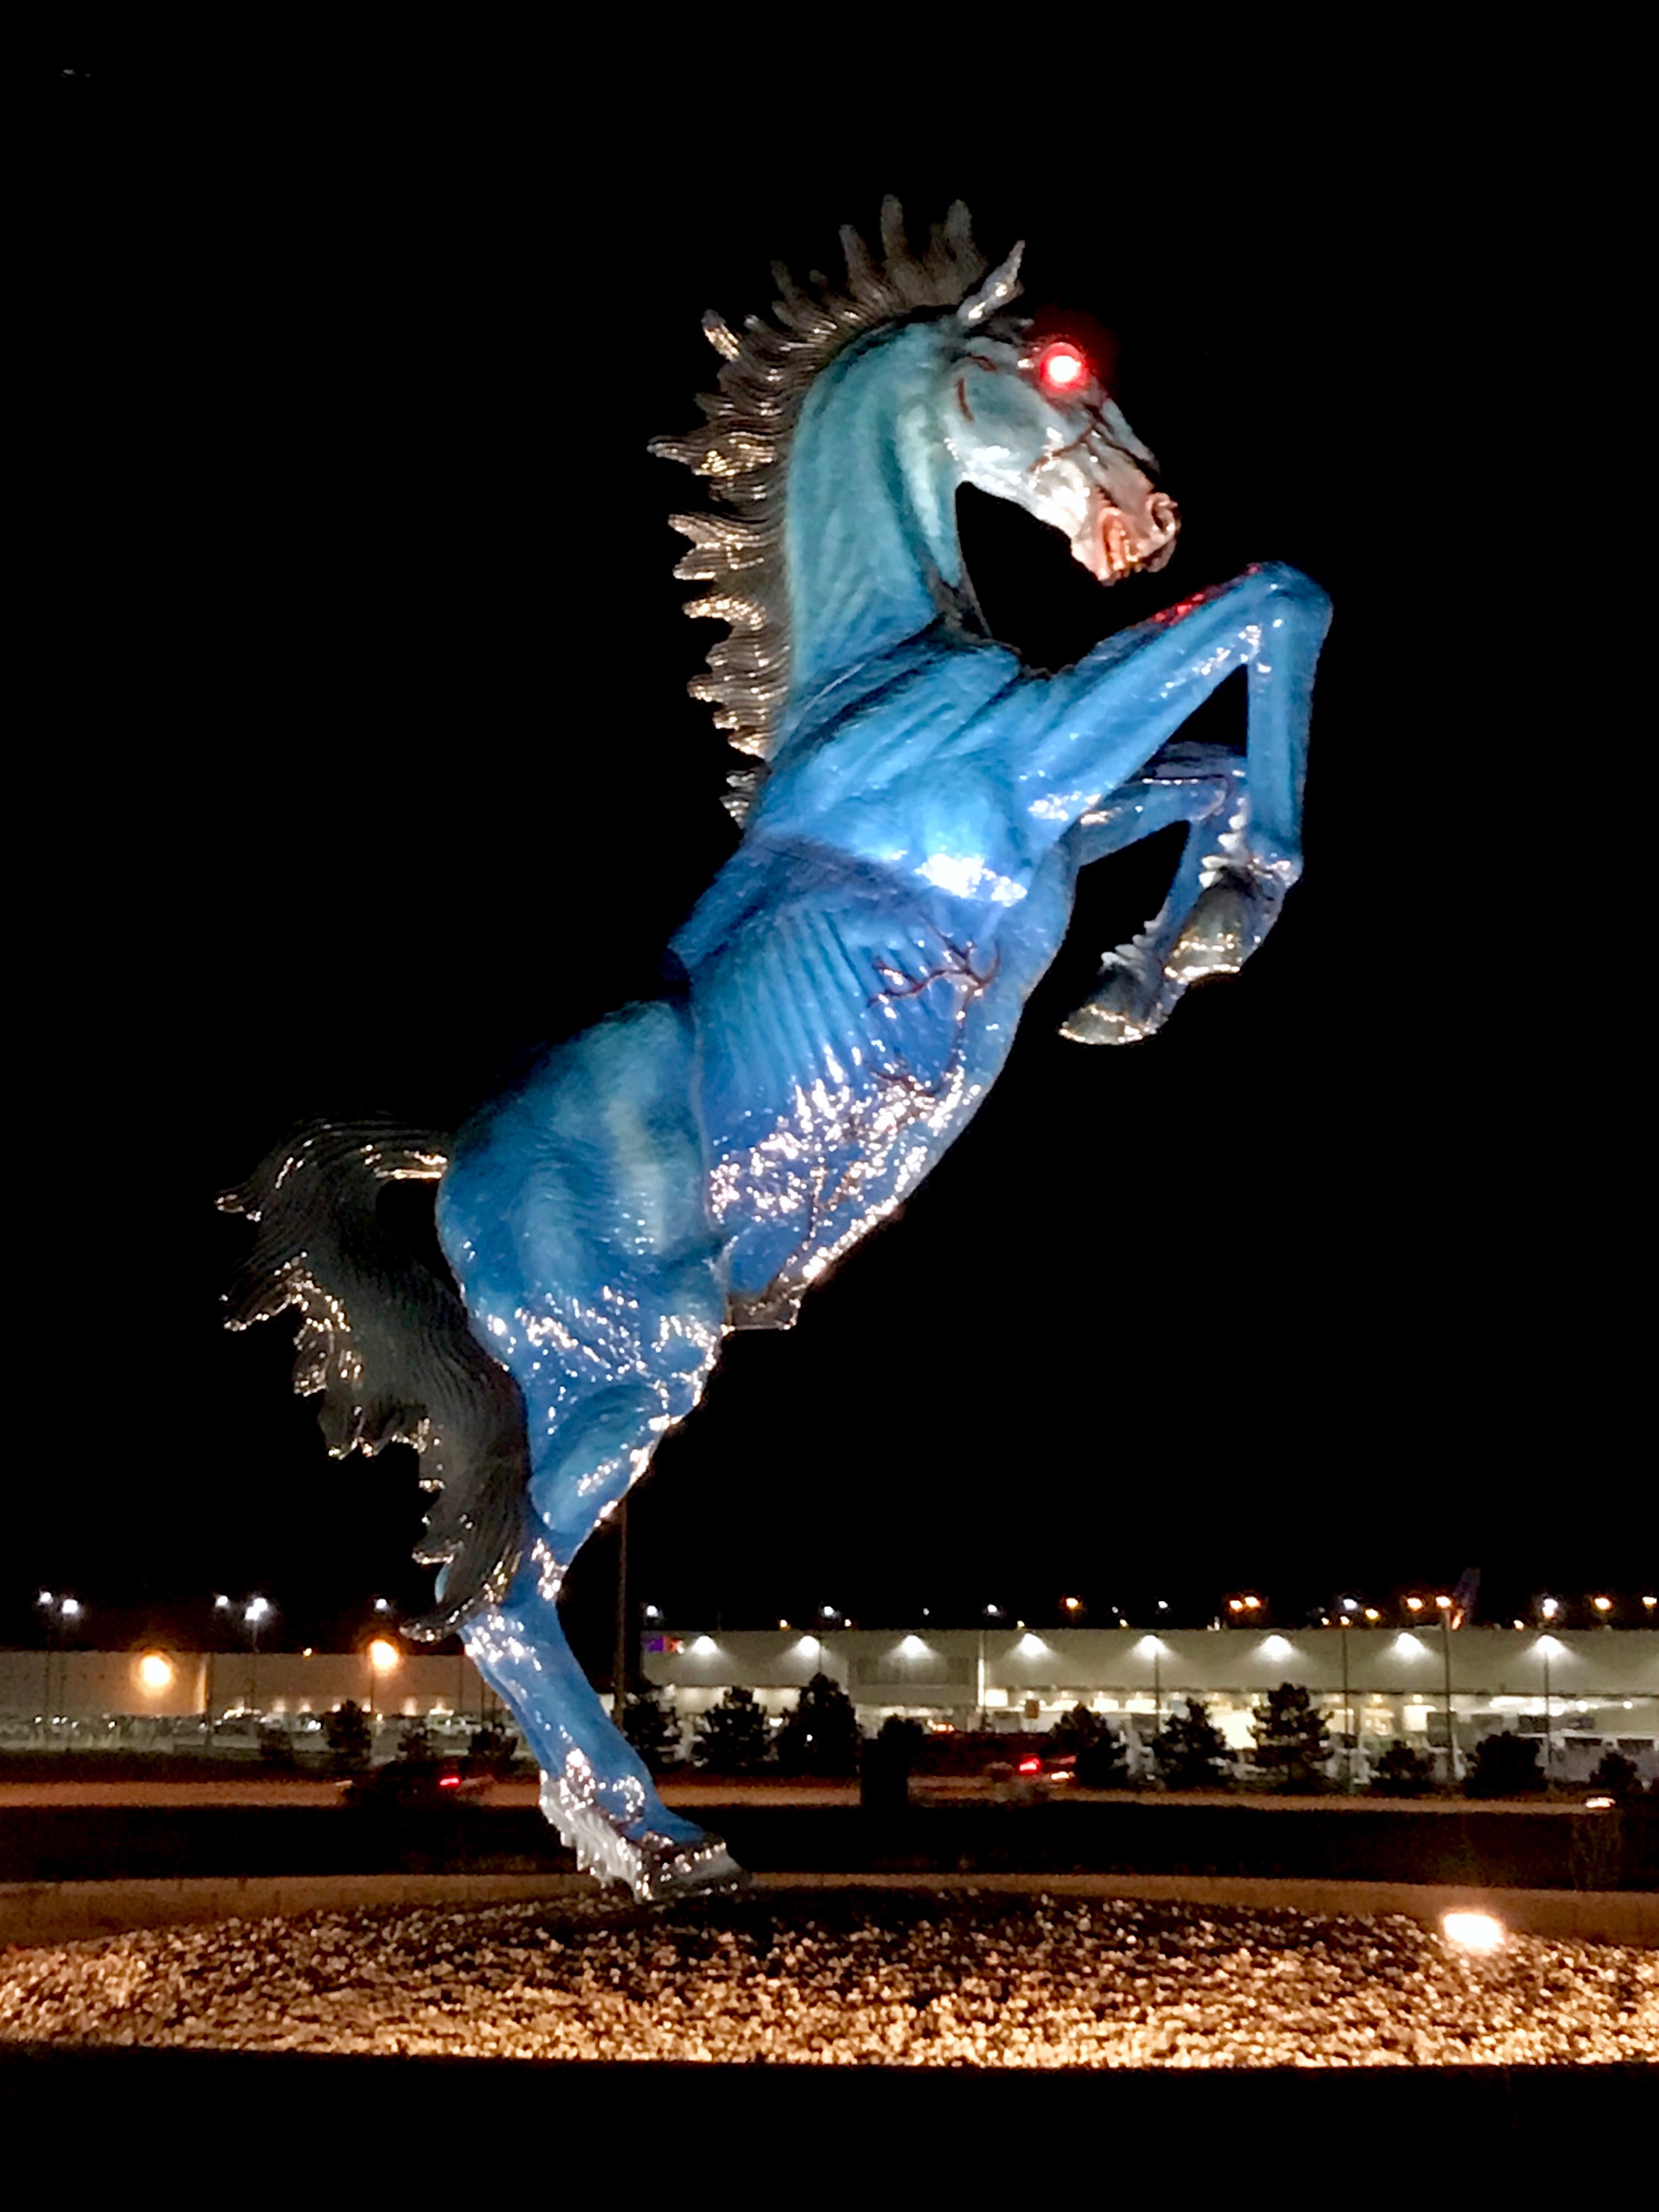 Blue Mustang (Blucifer), The Horse Sculpture With Glowing Red Eyes at